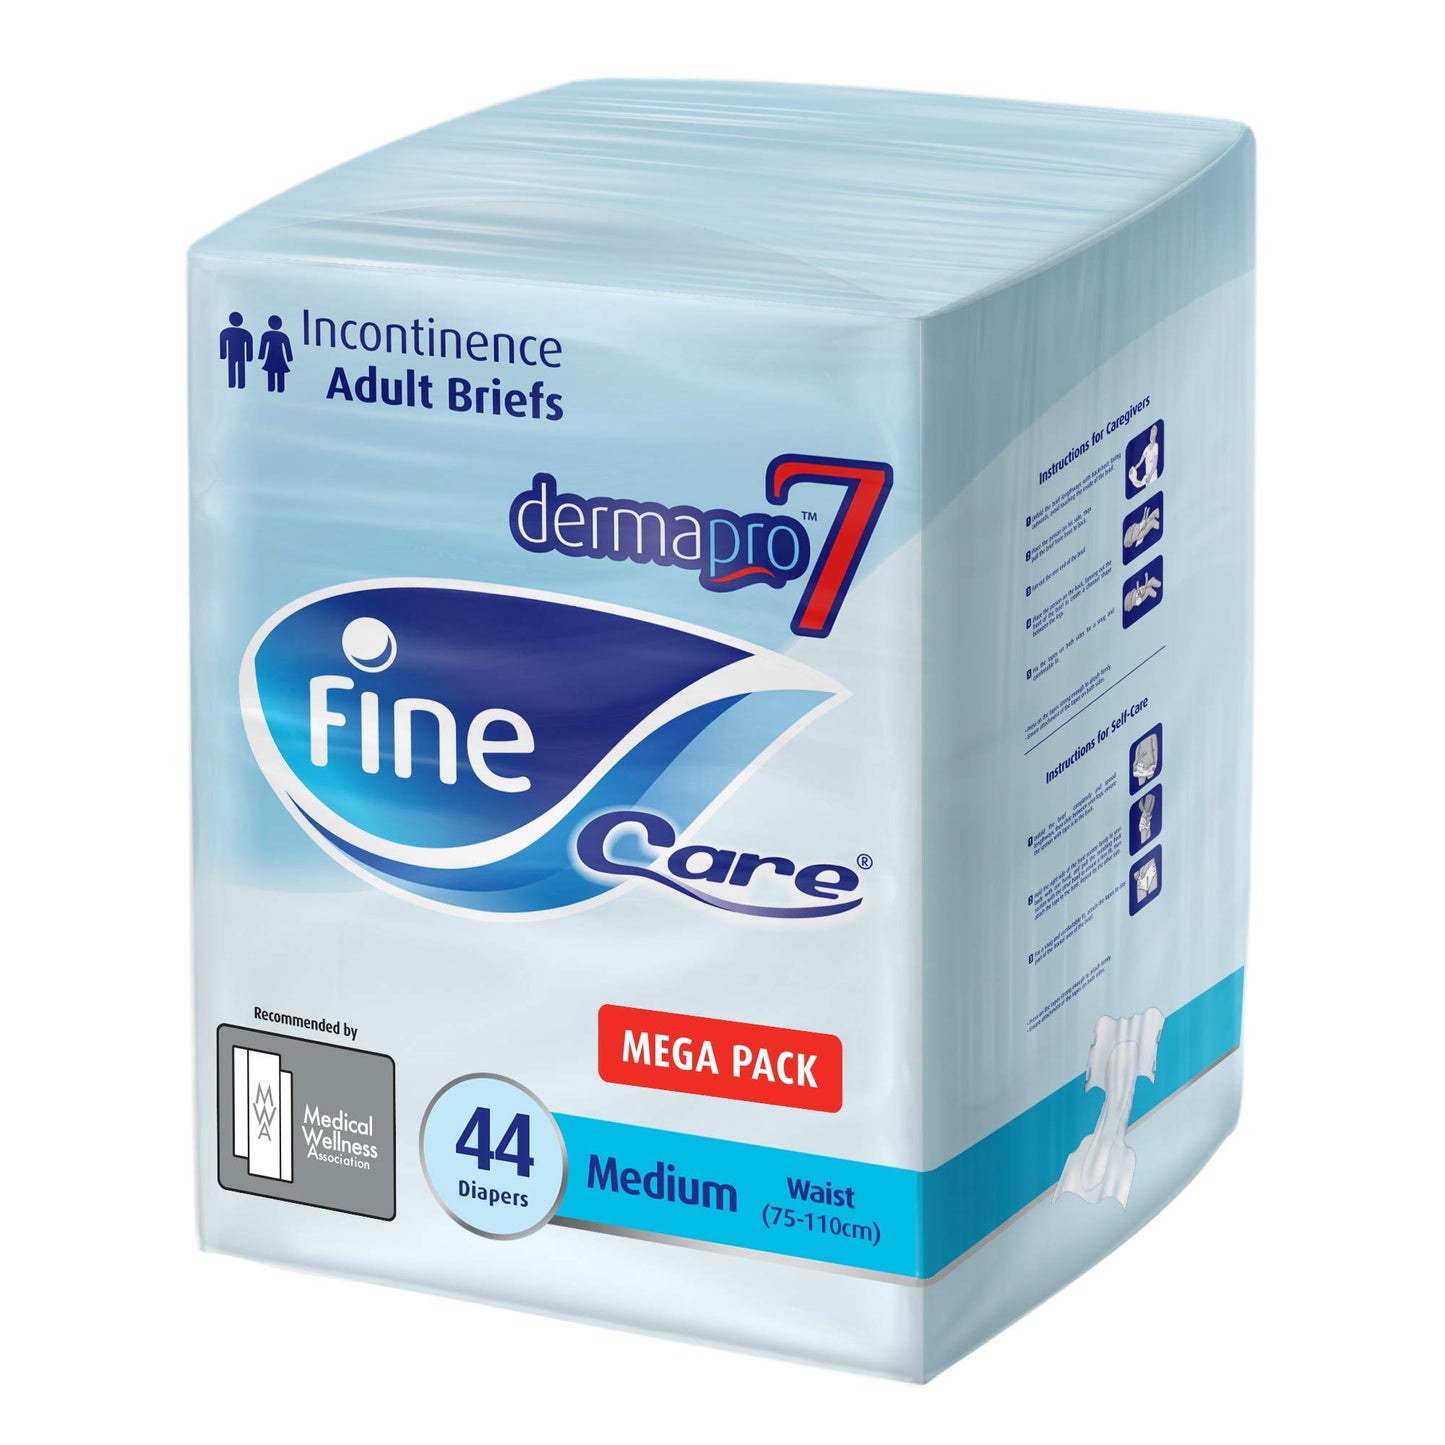 Fine Care Incontinence Unisex Adult Diaper Brief, Medium, waist size 75 - 110 cm (30 – 43 Inch), 44 diapers with Maximum Absorbency and Leak Protection